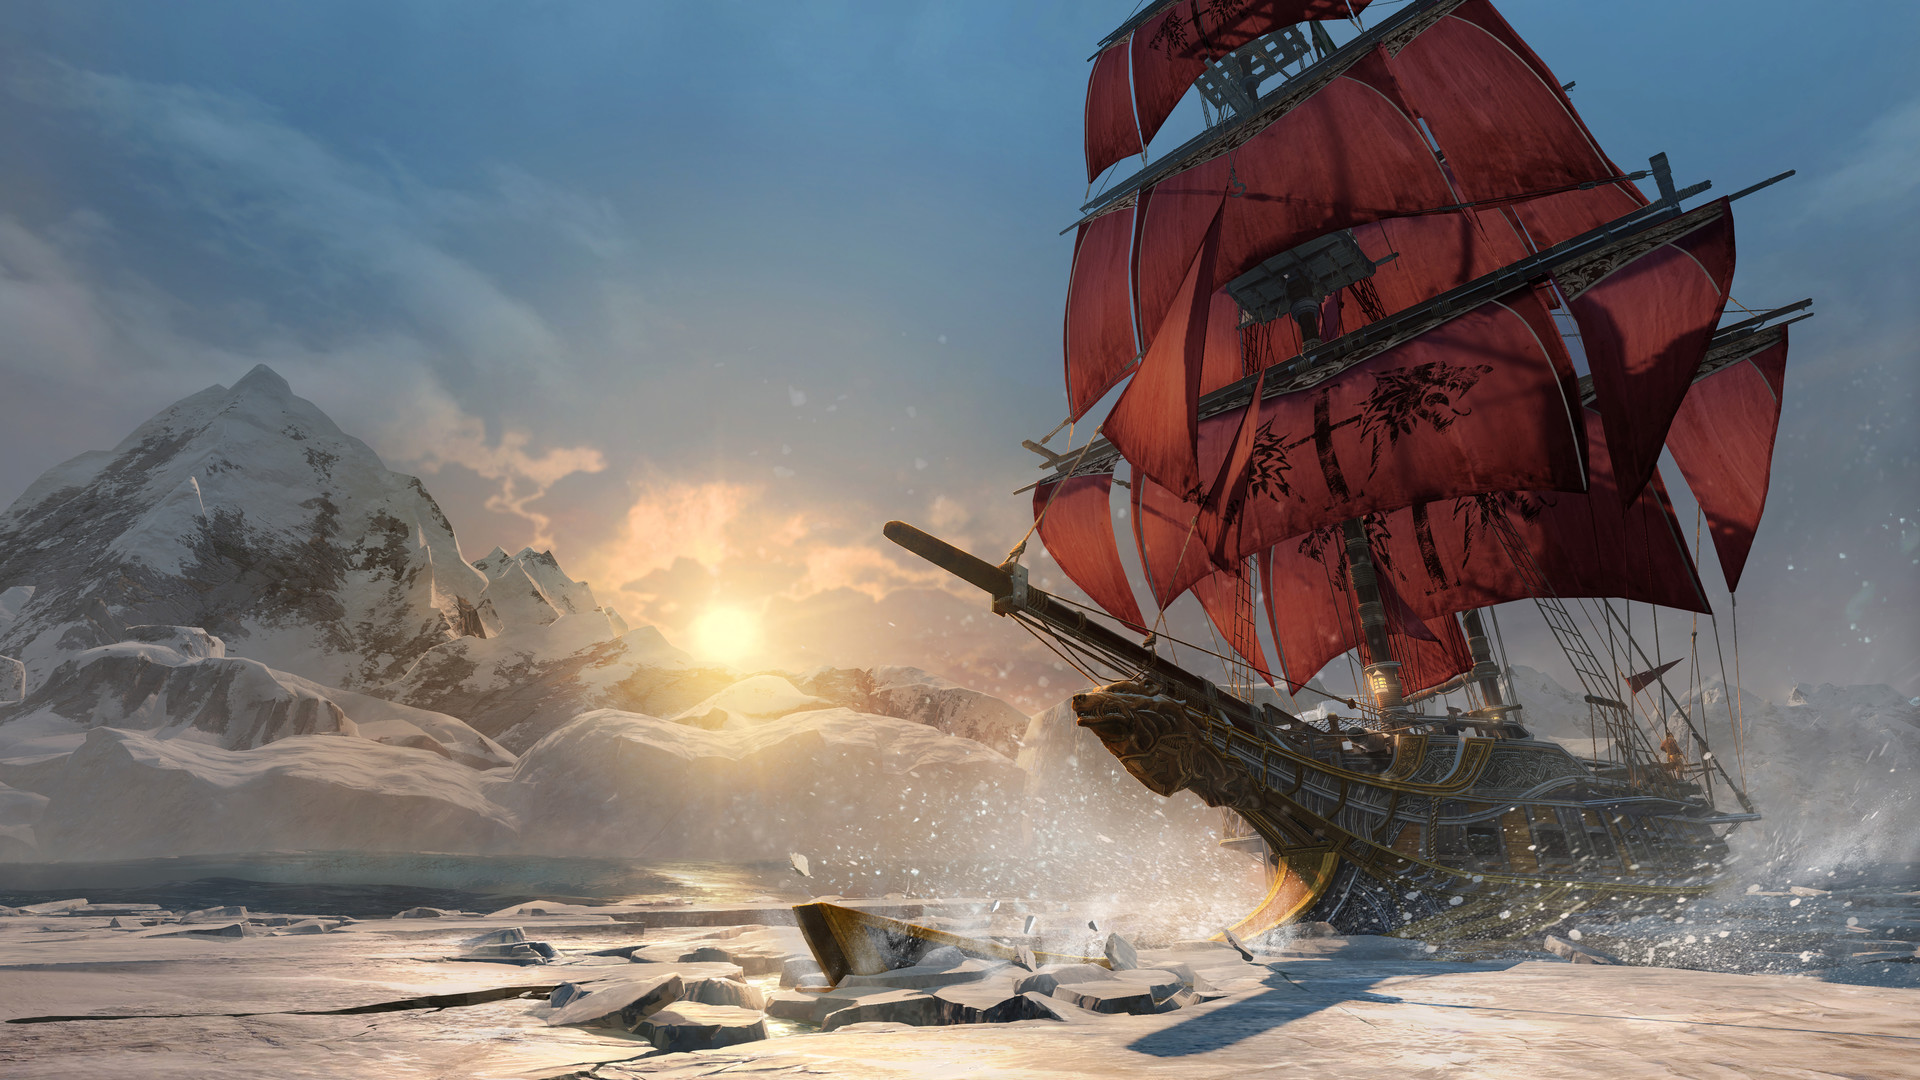 Assassin's Creed® Rogue on Steam